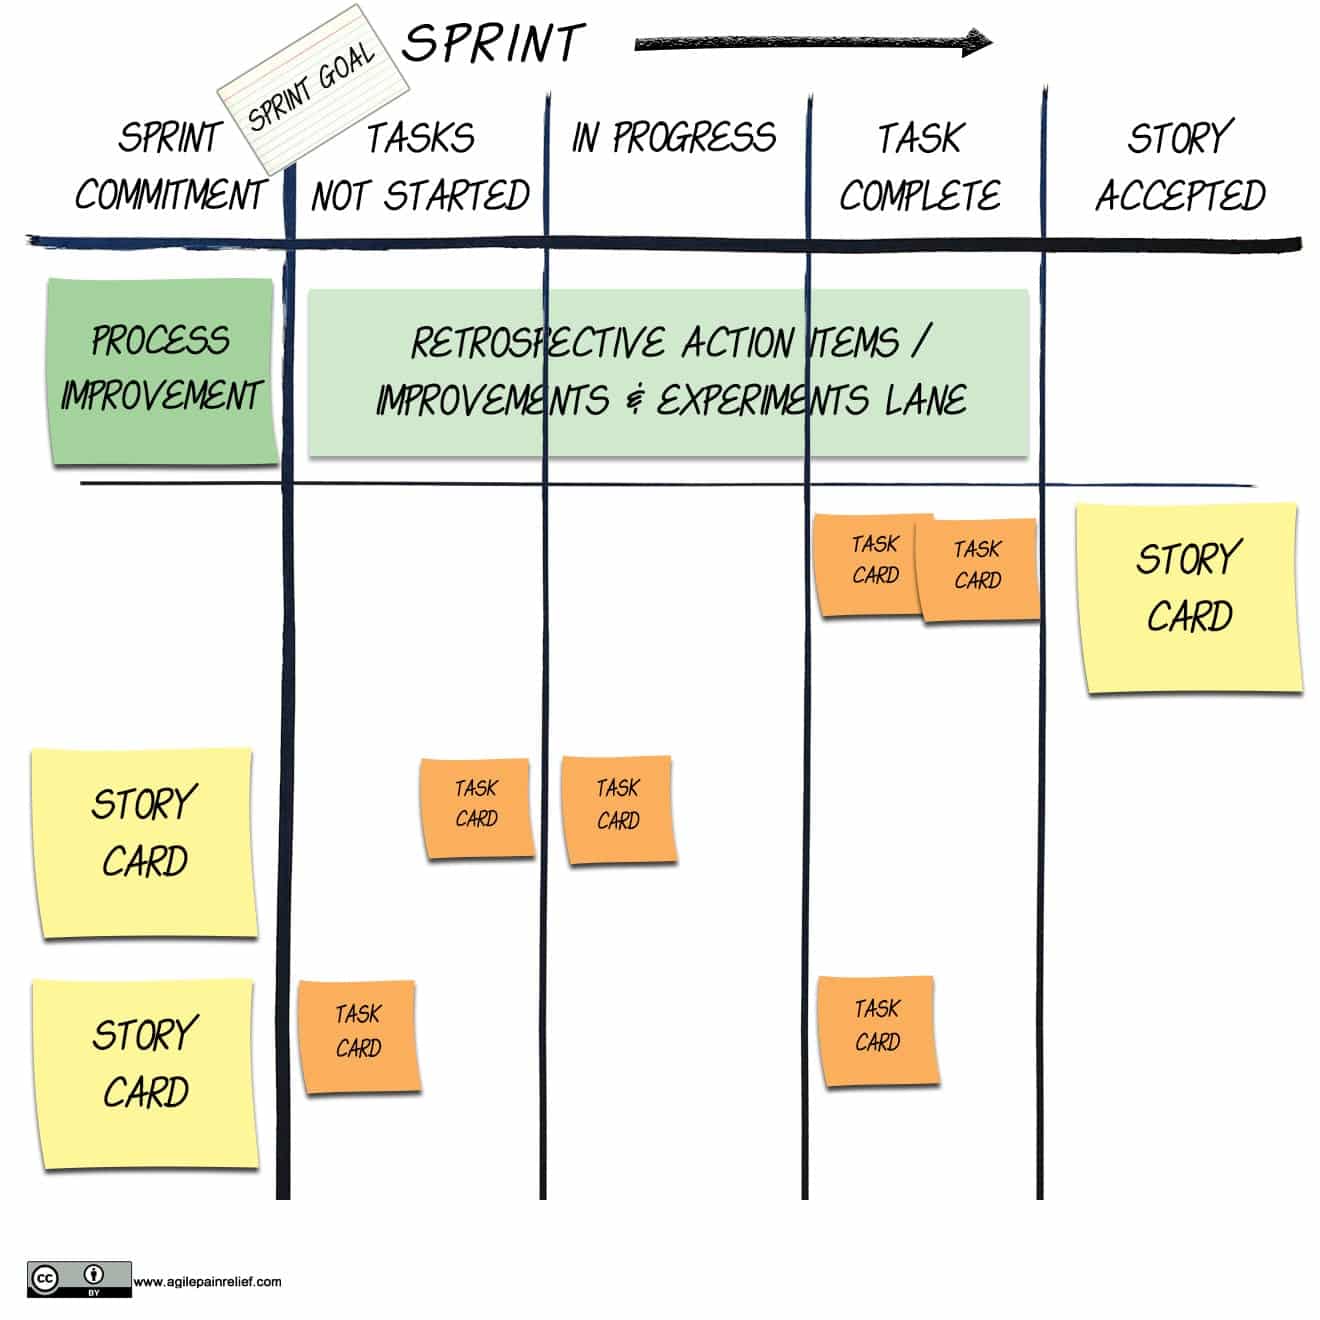 The Sprint Backlog: A Truly Complete Guide with Examples | Obiaks